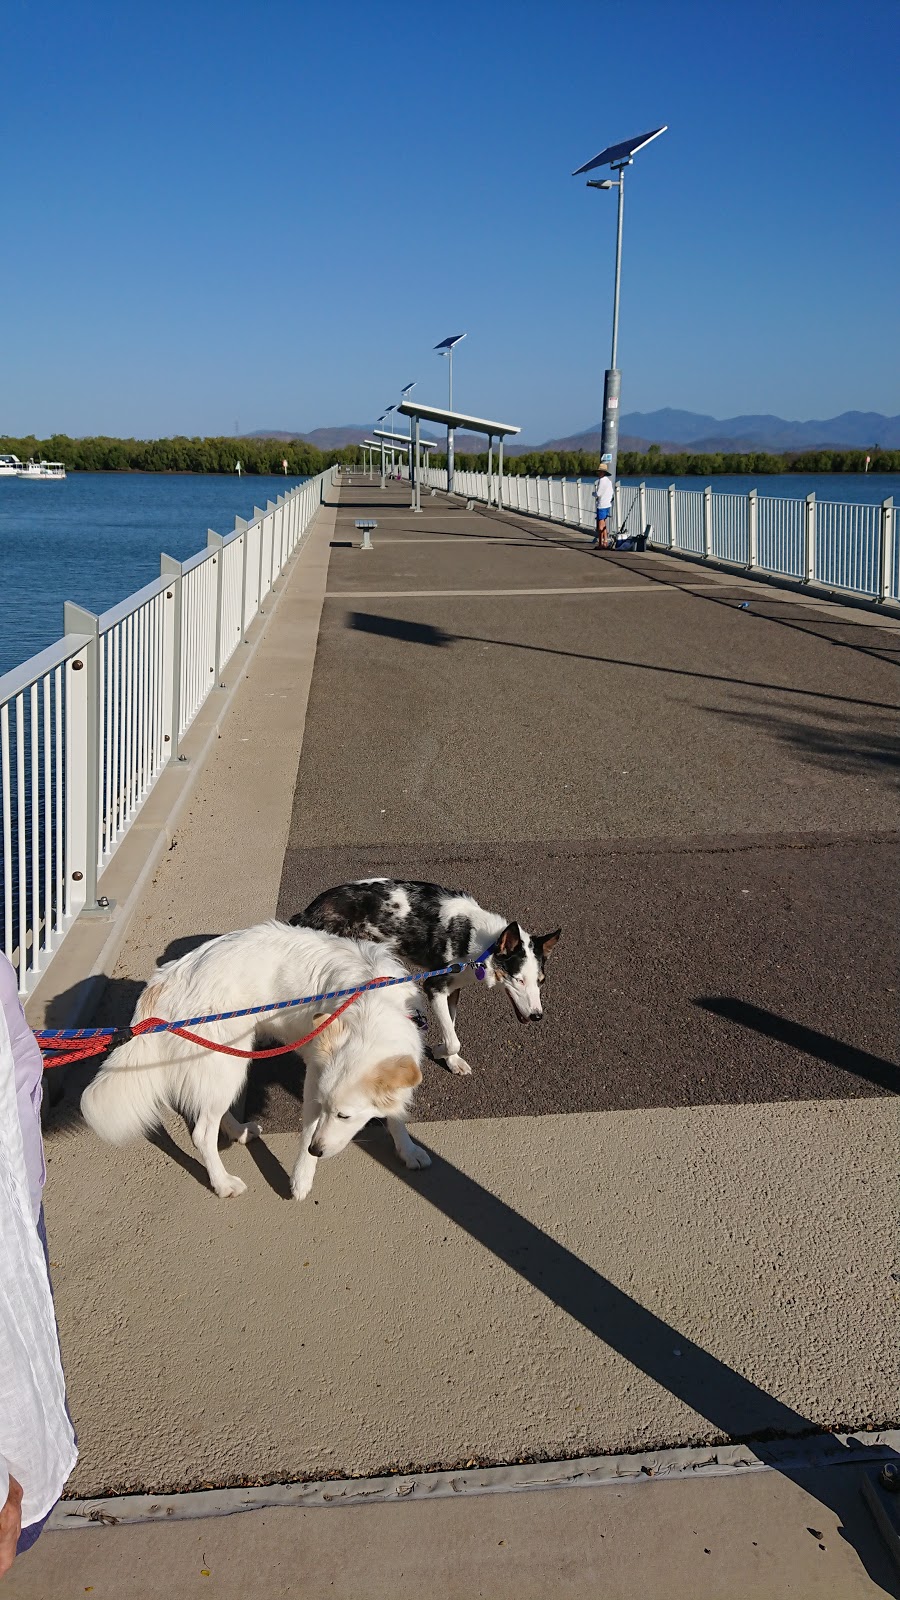 Townsville Recreational Boating Park | Fifth Ave, South Townsville QLD 4810, Australia